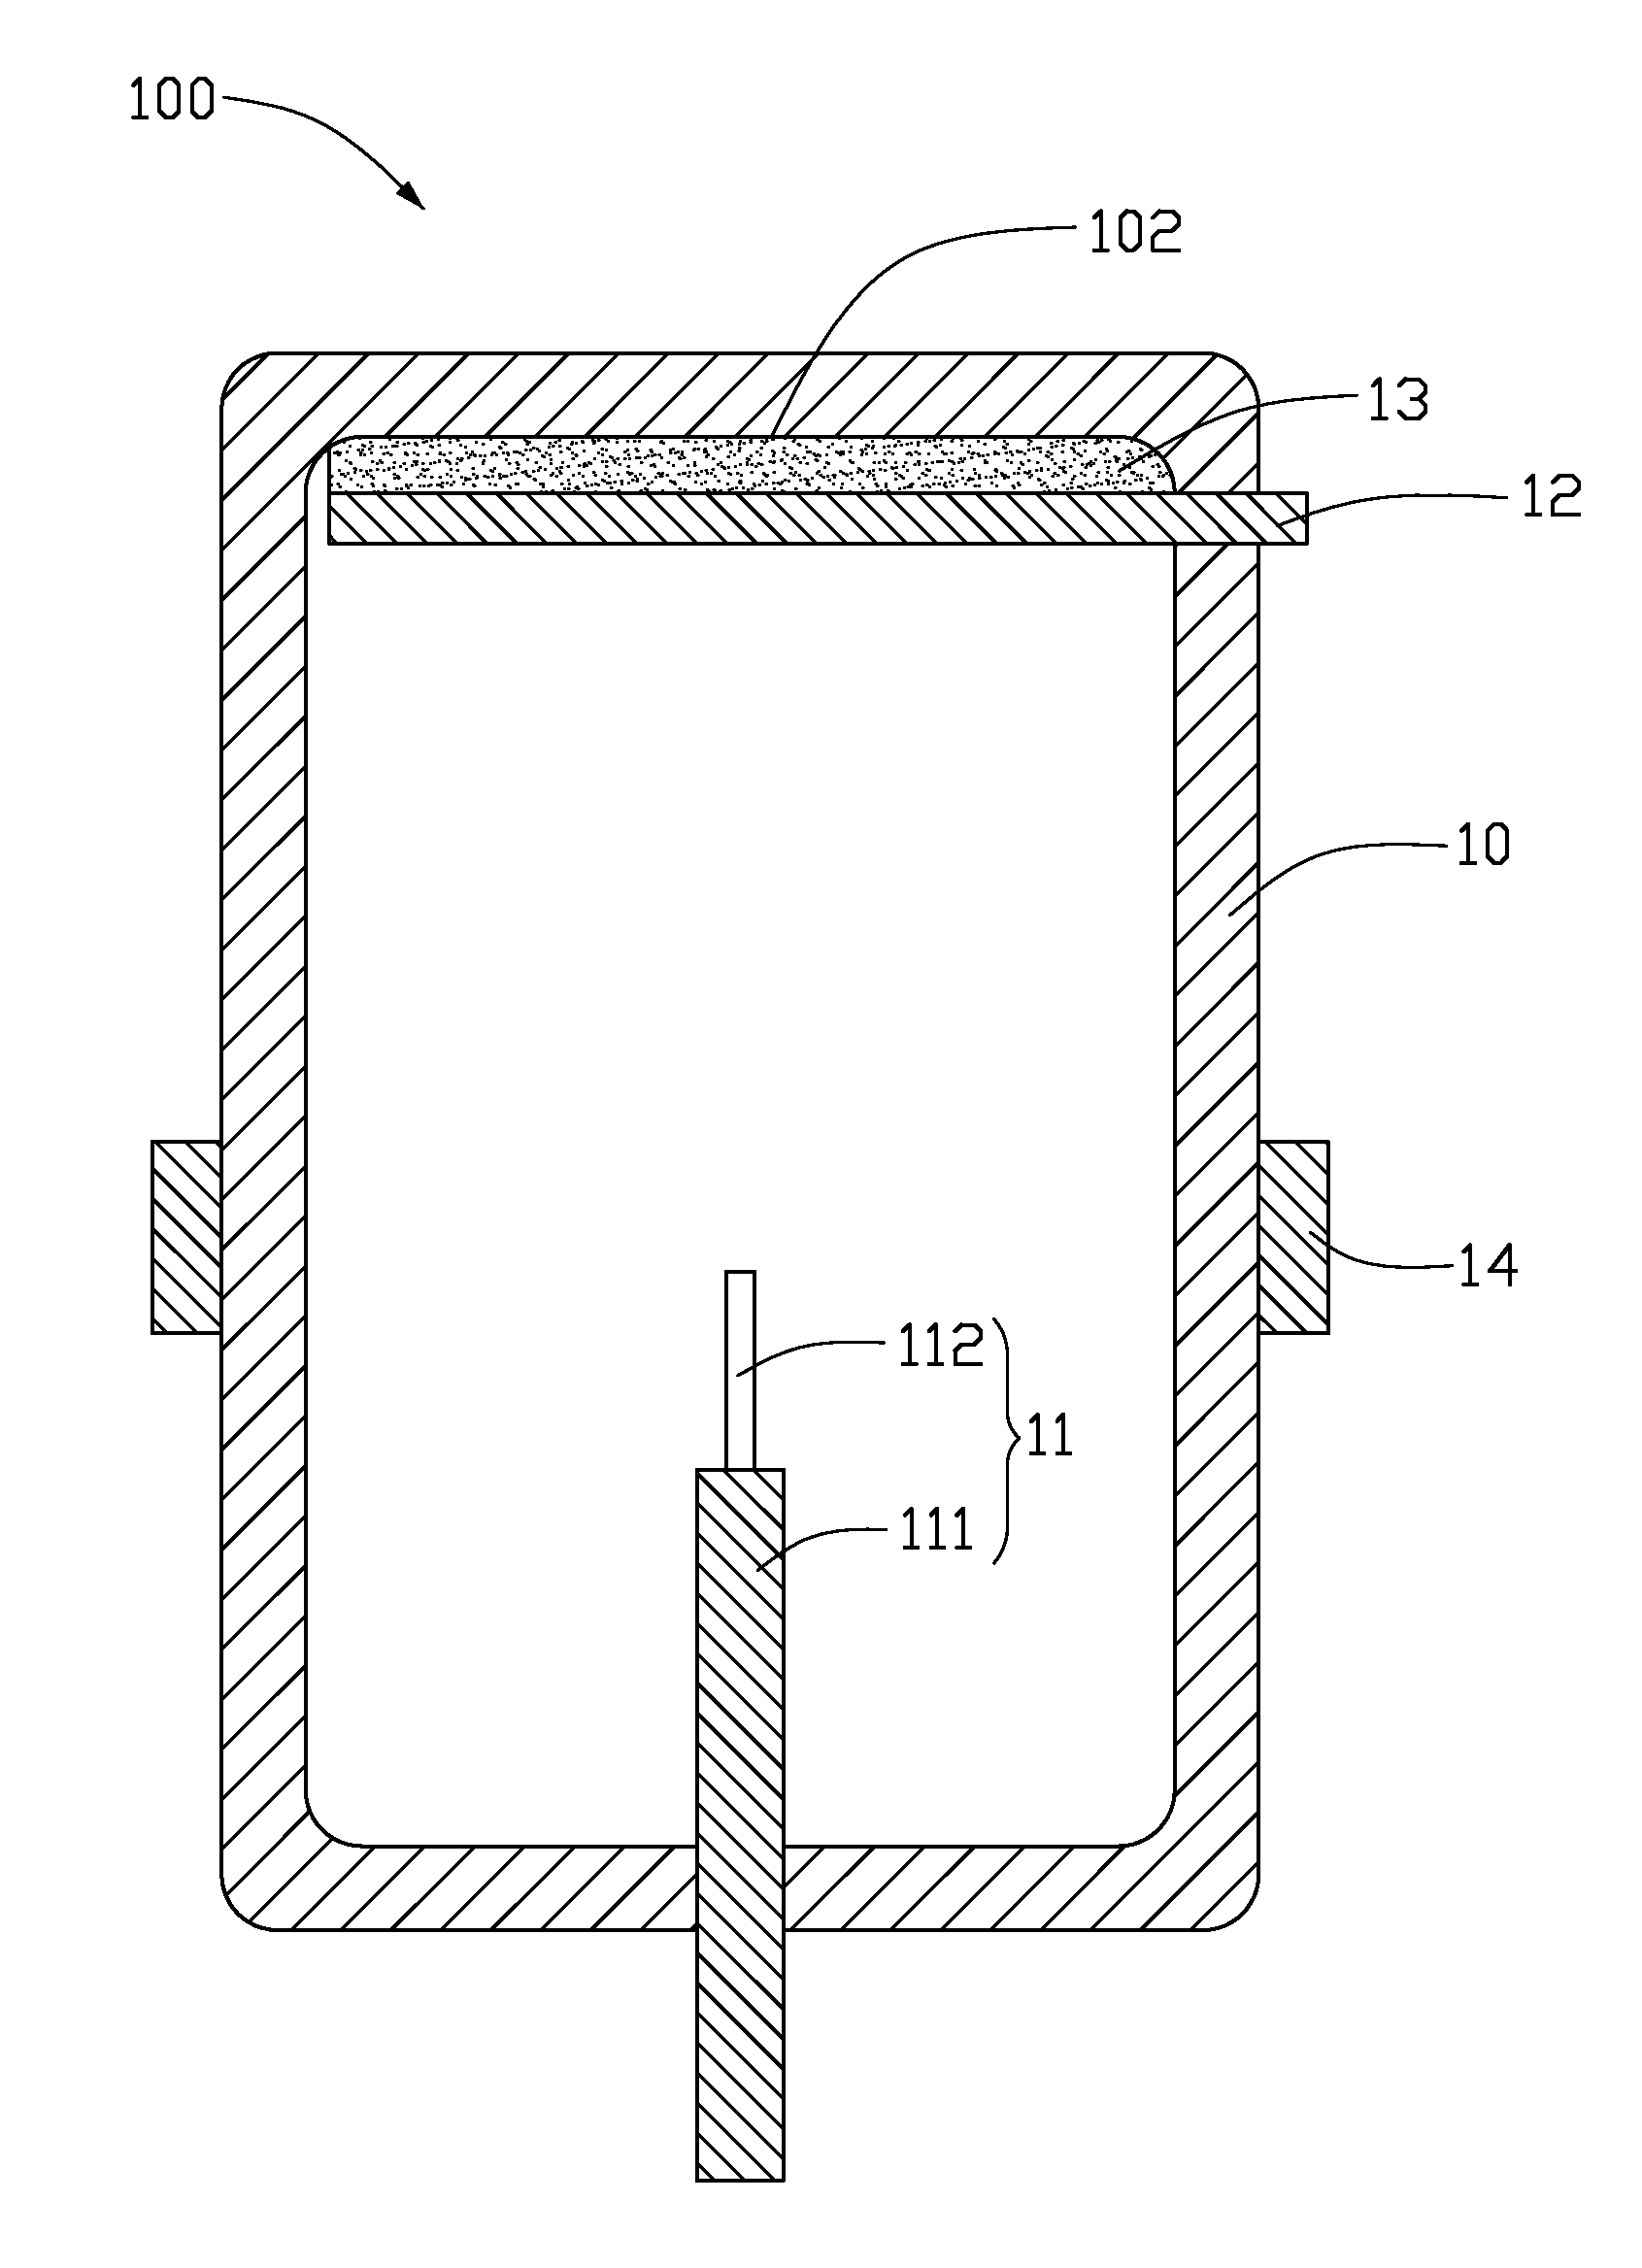 Pixel tube for field-emission display device